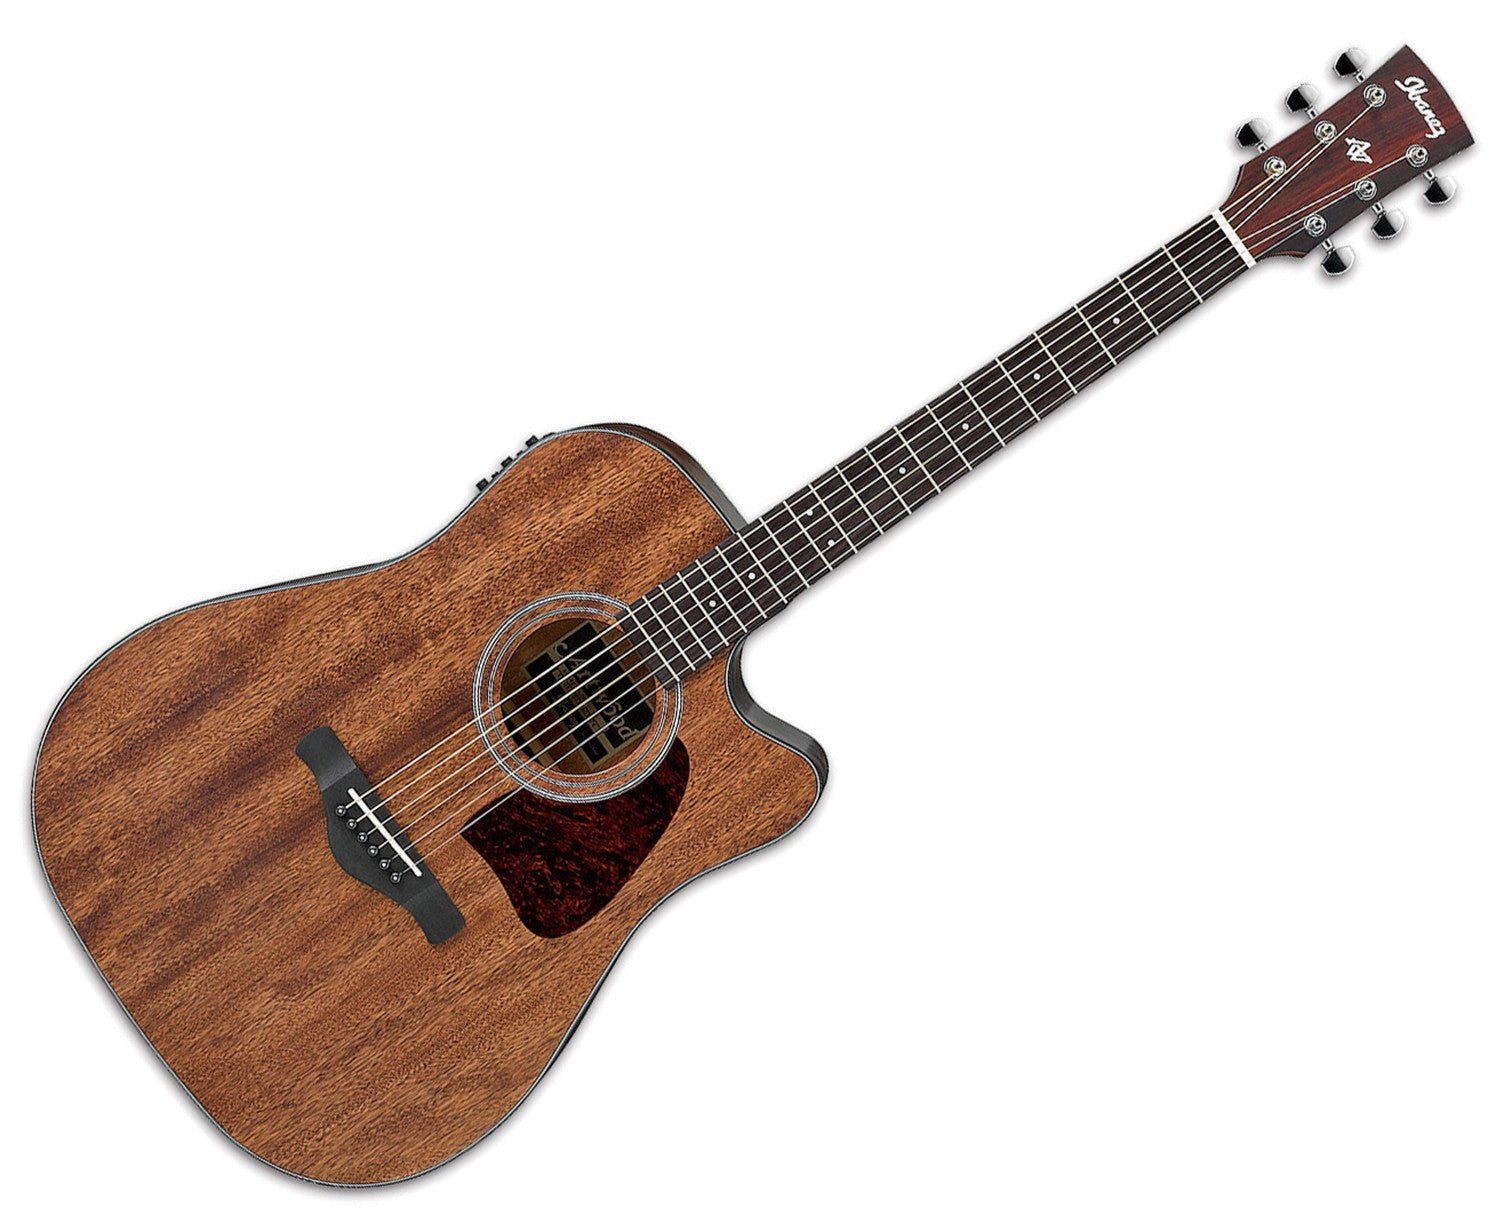 IBANEZ AW54CE ACOUSTIC GUITAR, IBANEZ, ACOUSTIC GUITAR, ibanez-aw54ce-acoustic-guitar, ZOSO MUSIC SDN BHD